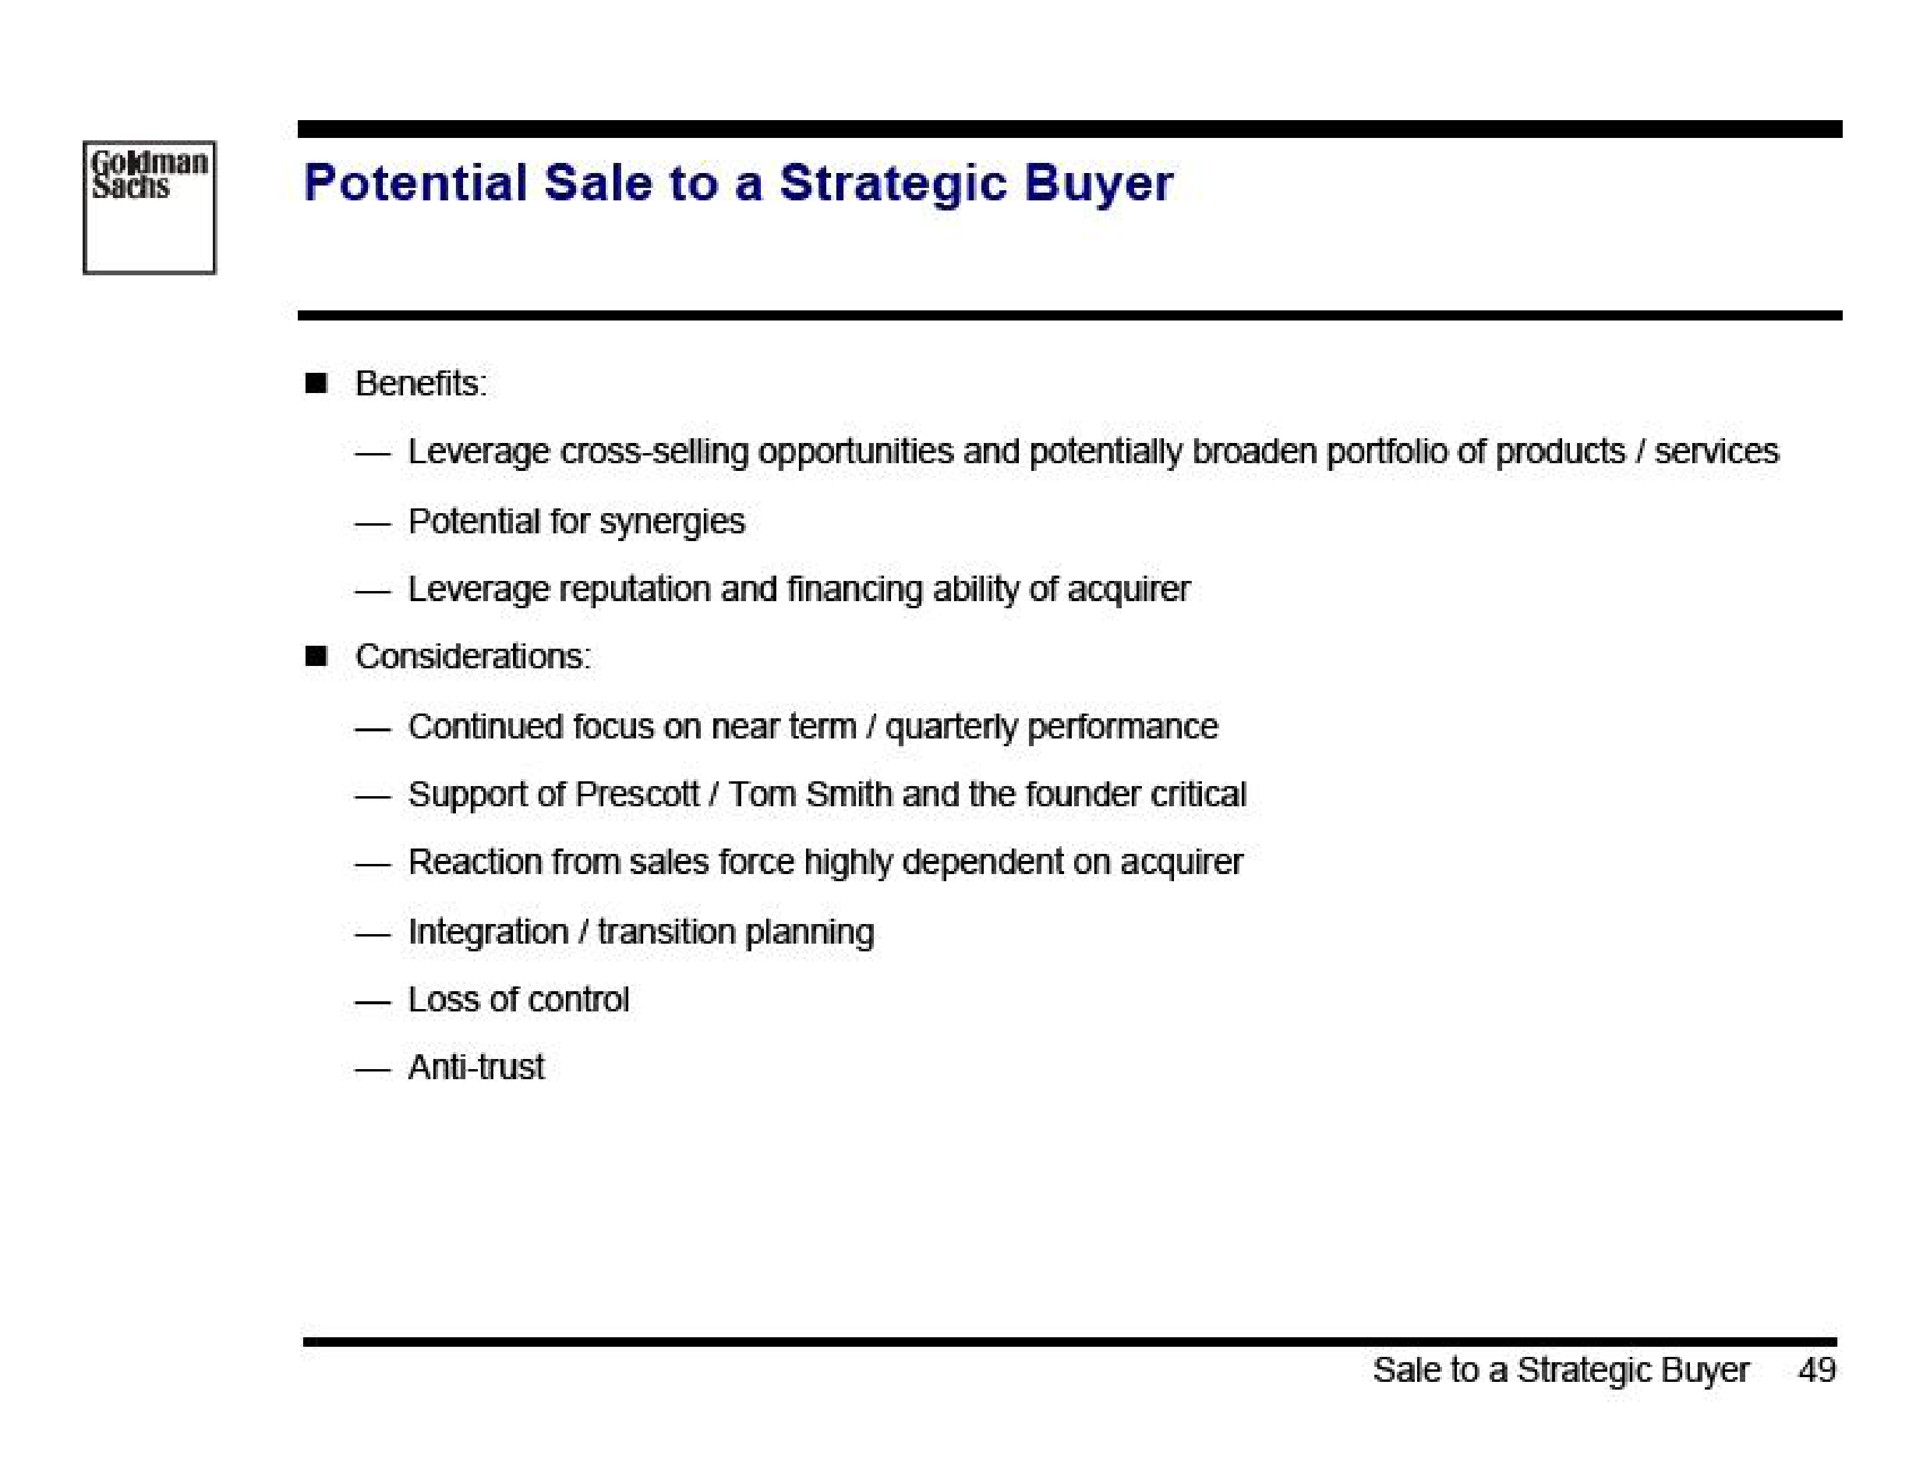 potential sale to a strategic buyer | Goldman Sachs